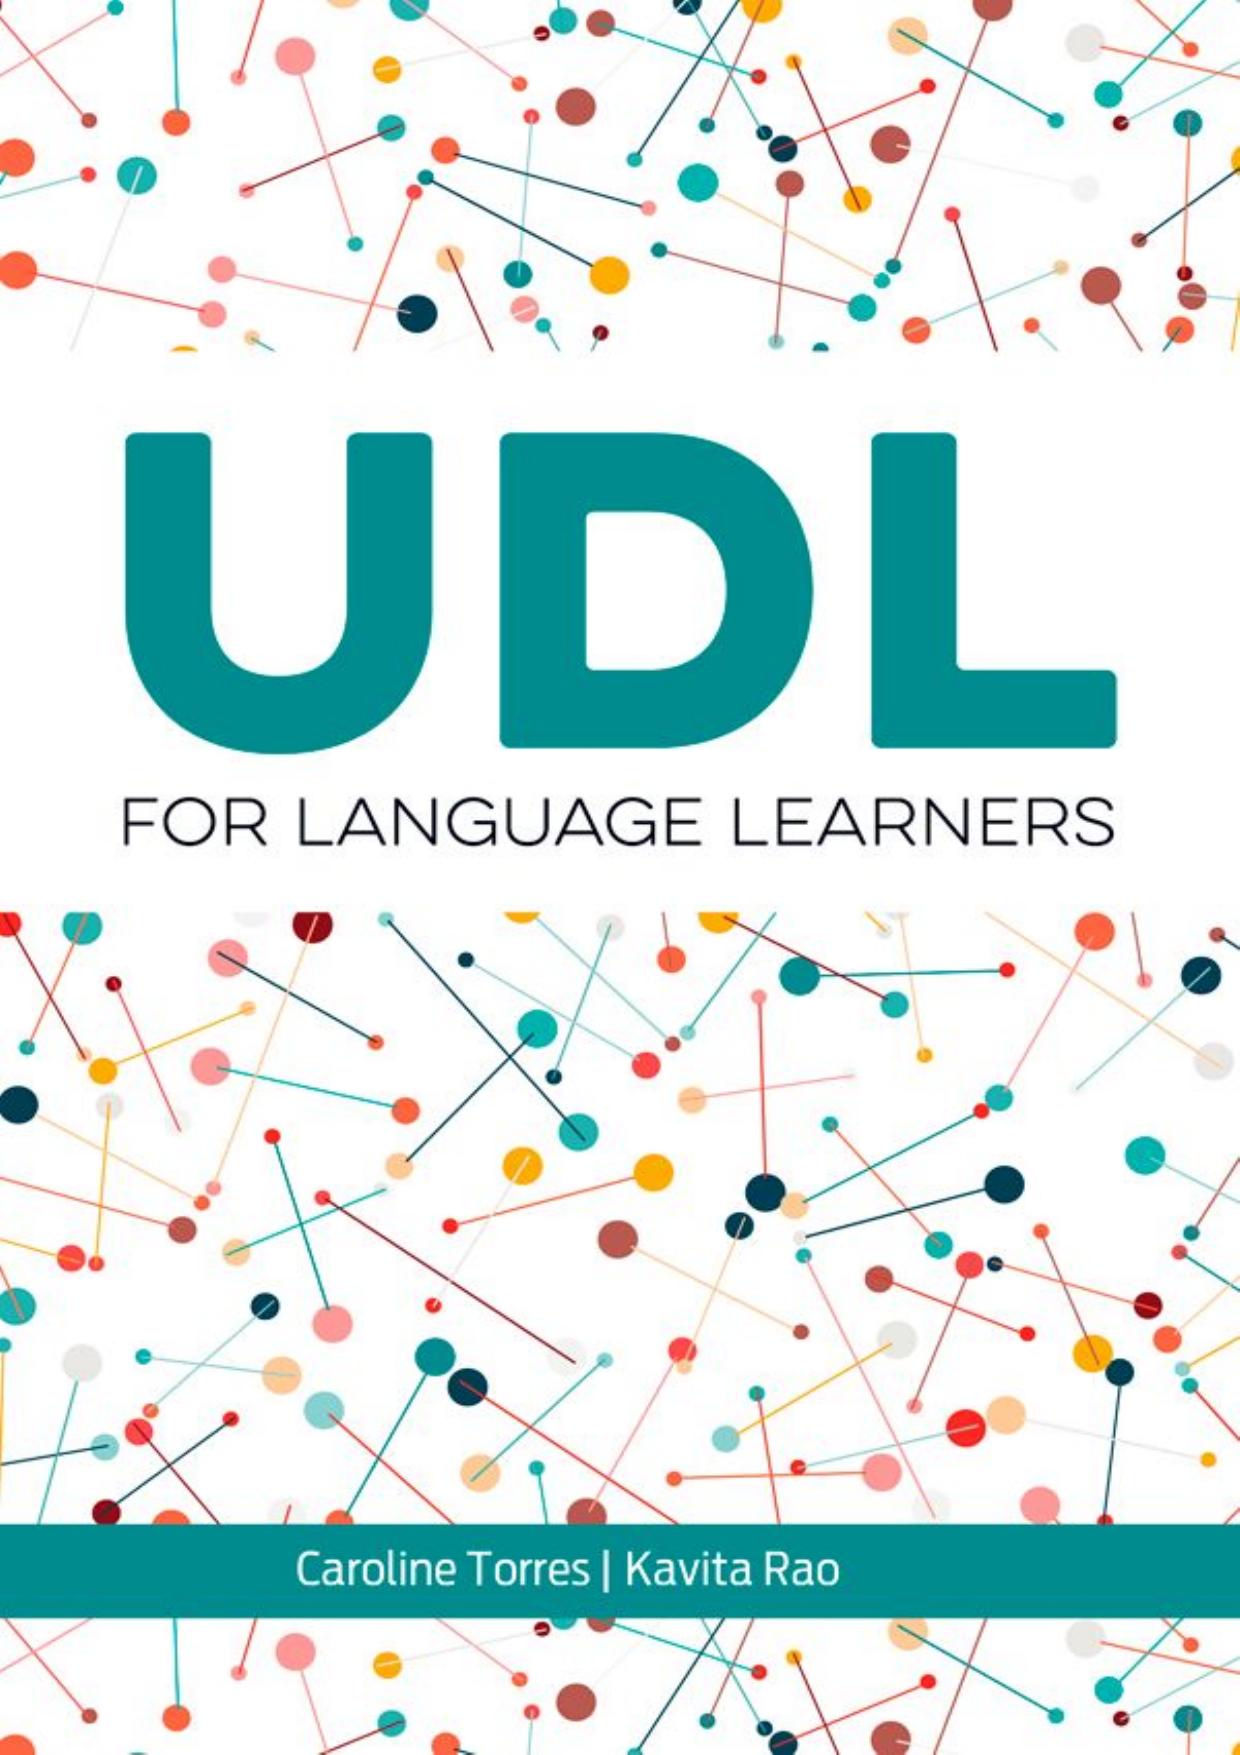 UDL for Language Learners  by Caroline Torres  and  Kavita Rao